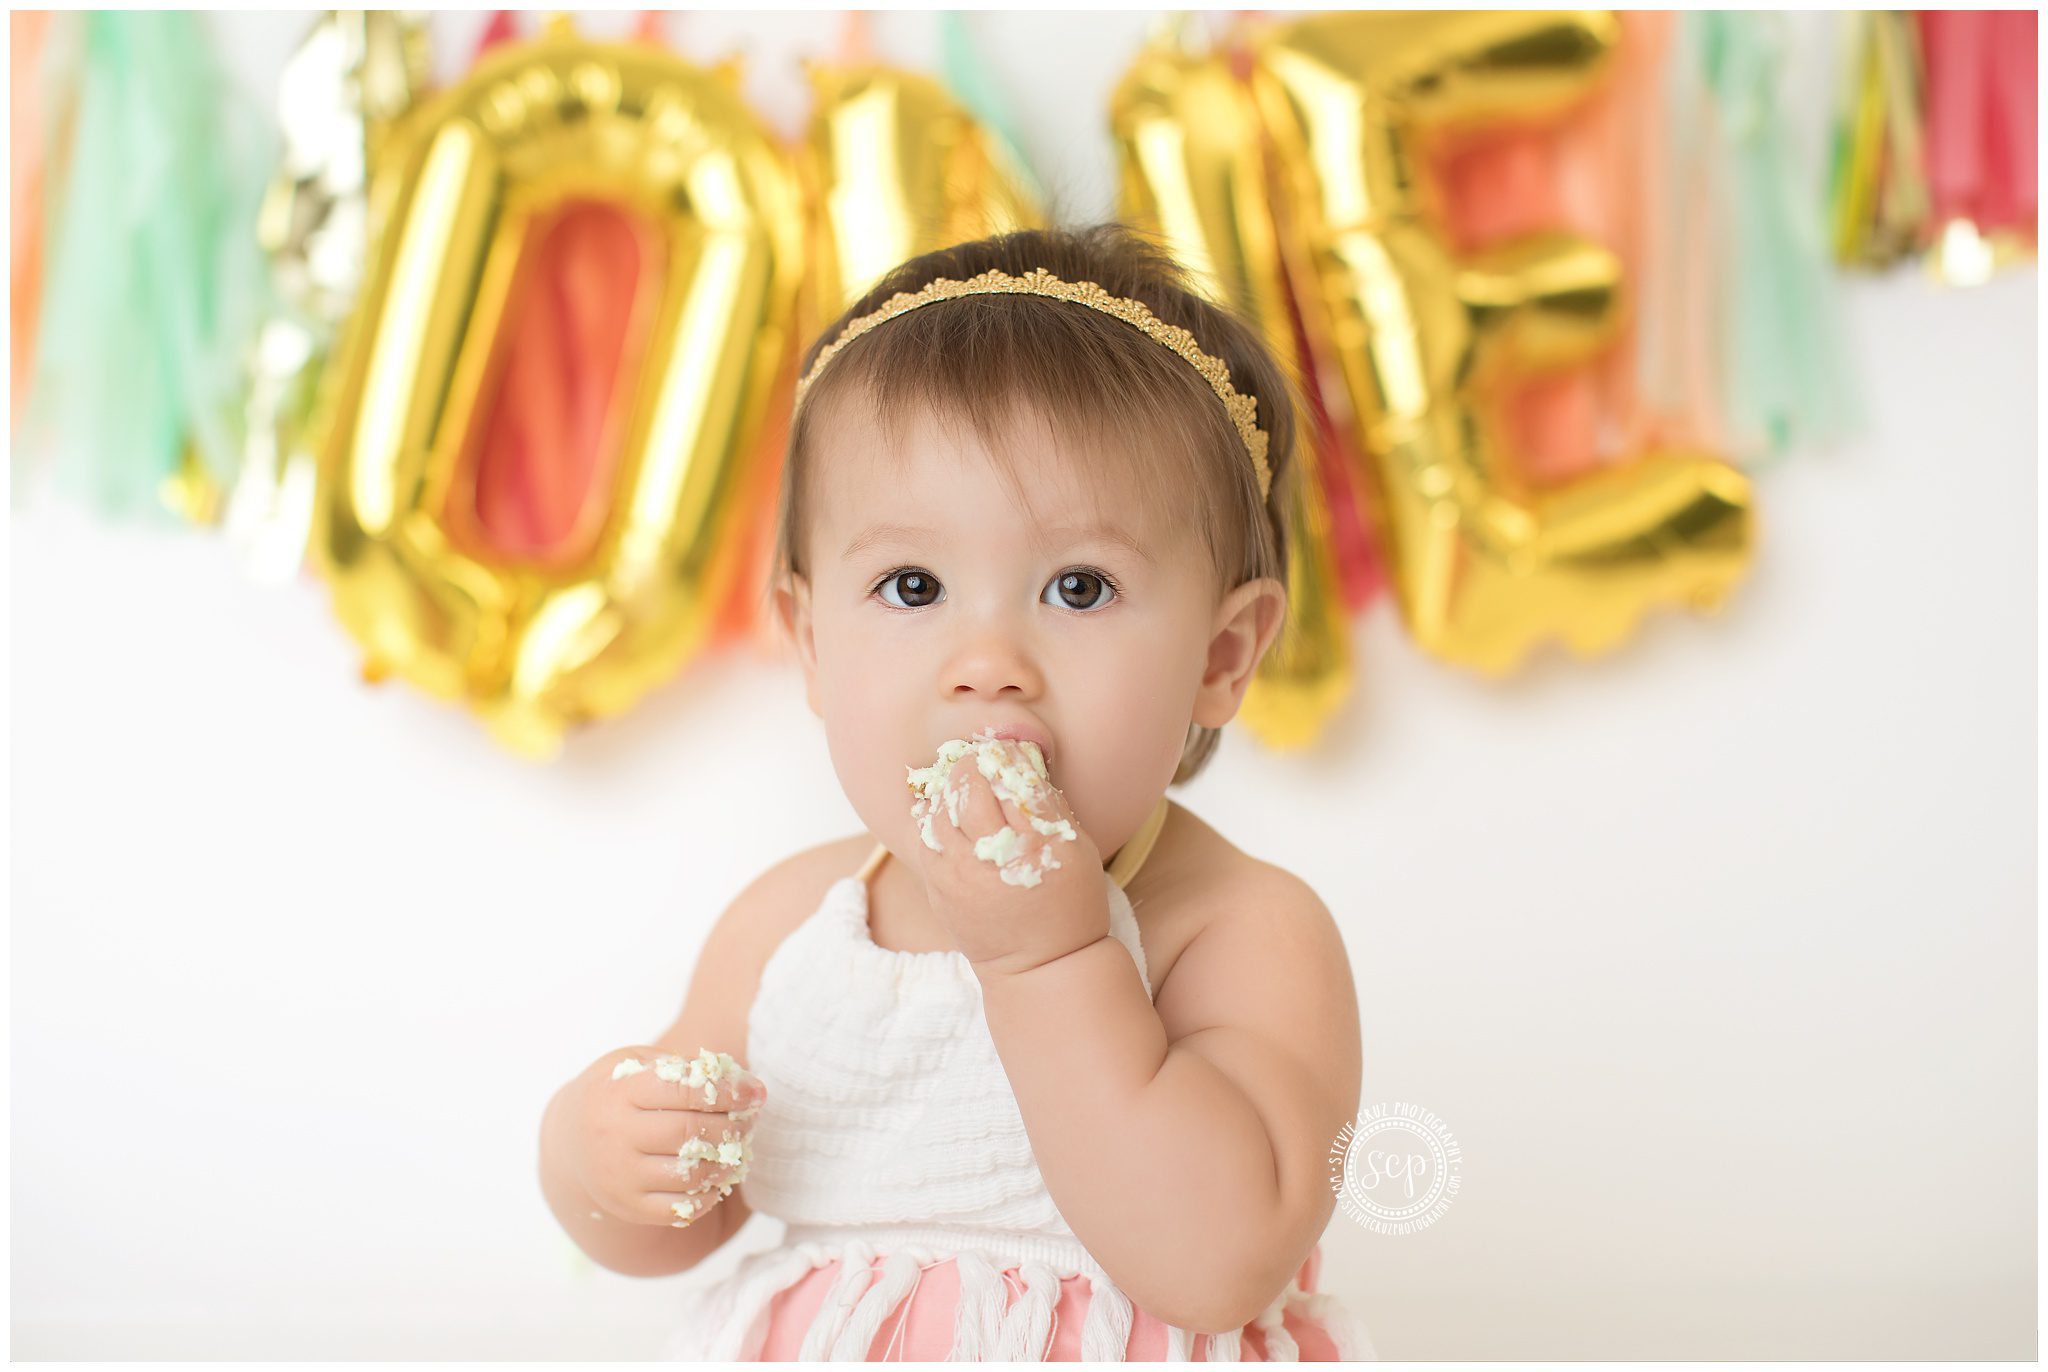 Simply in love with this one year old birthday cake smash photo session by Stevie Cruz photography